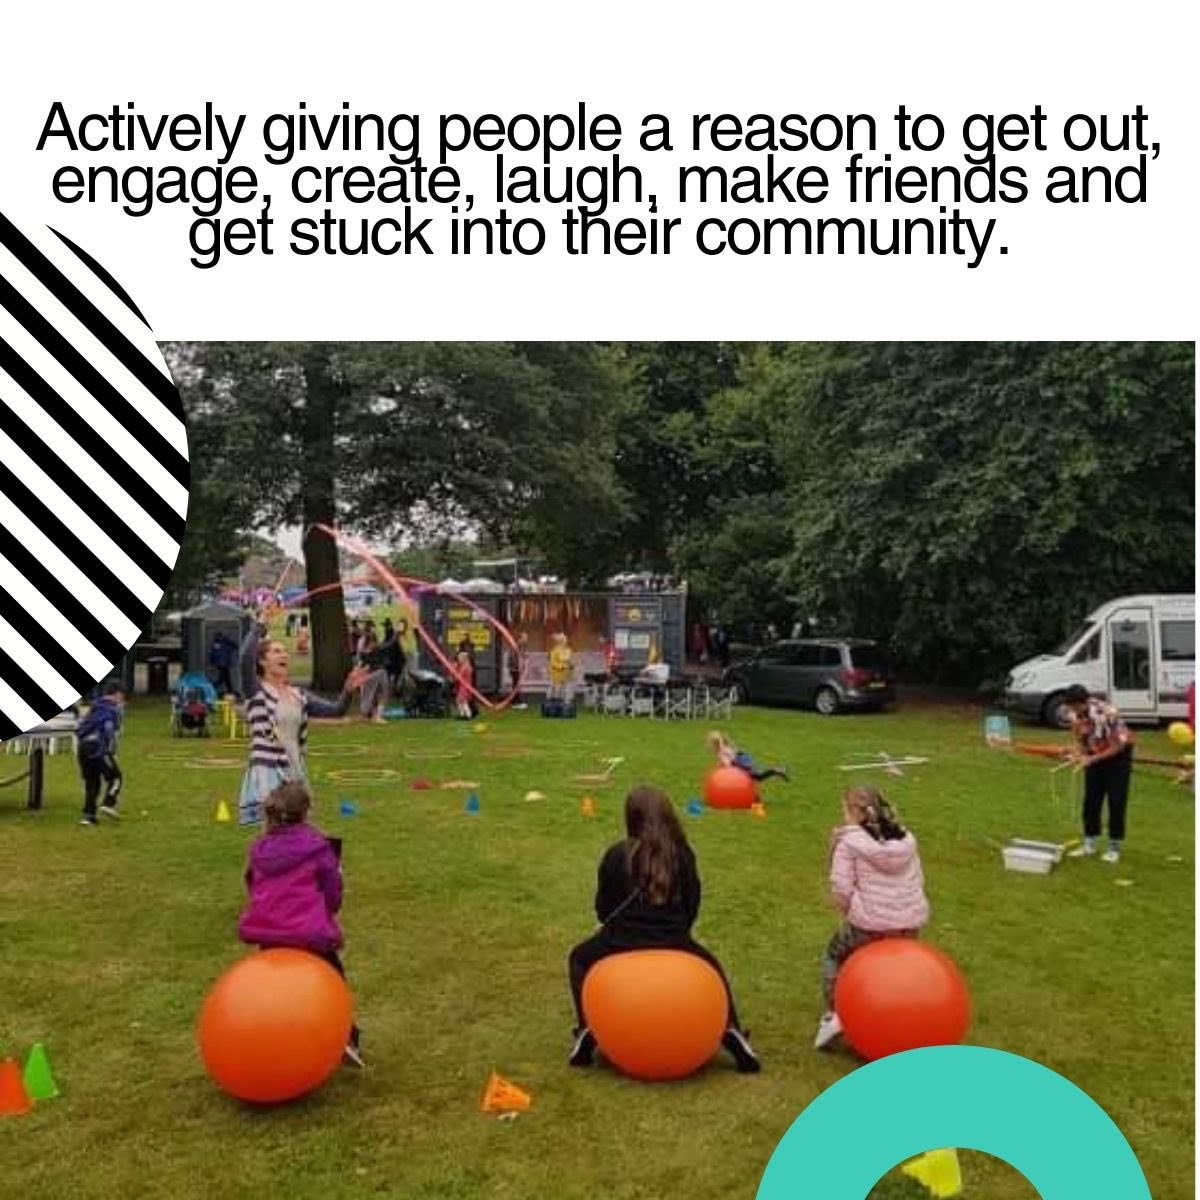 We’re putting together a funding application to celebrate 10 years of Playbox (this October) with the hopes of supporting 10 further communities (anywhere in the UK) to have @playbox01 resident for a month in 2025 Will you let us know if this would be of interest to you?